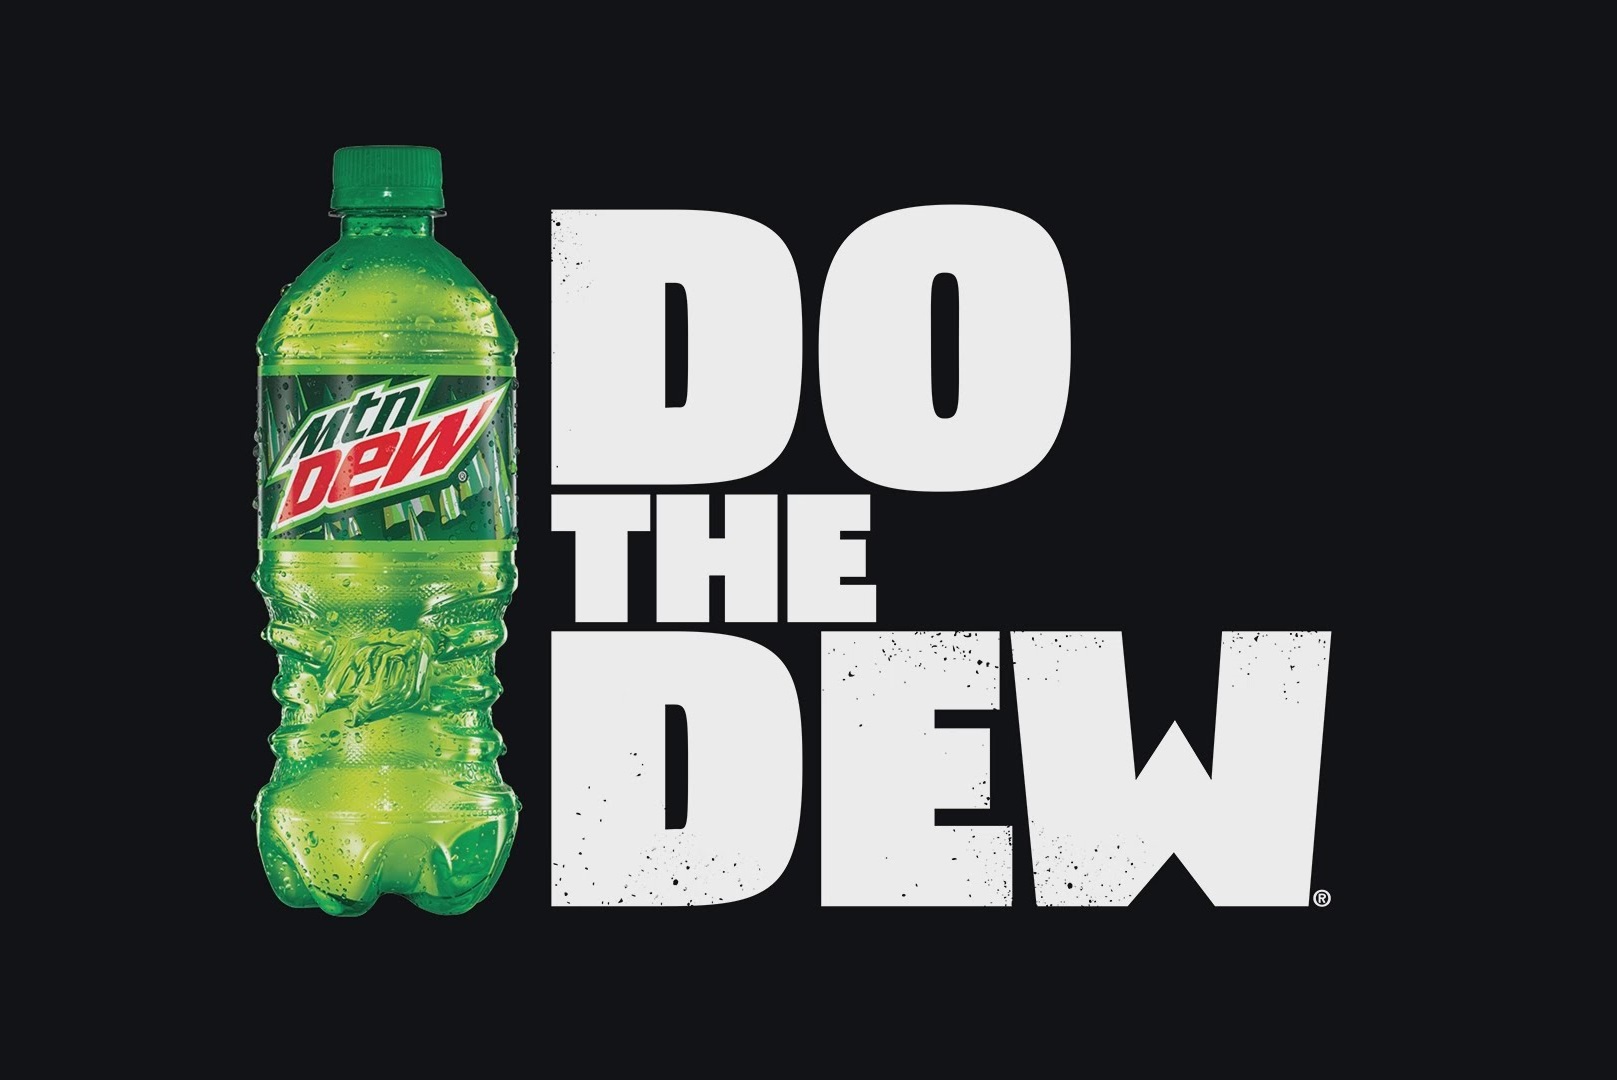 mountain dew rise commercial song